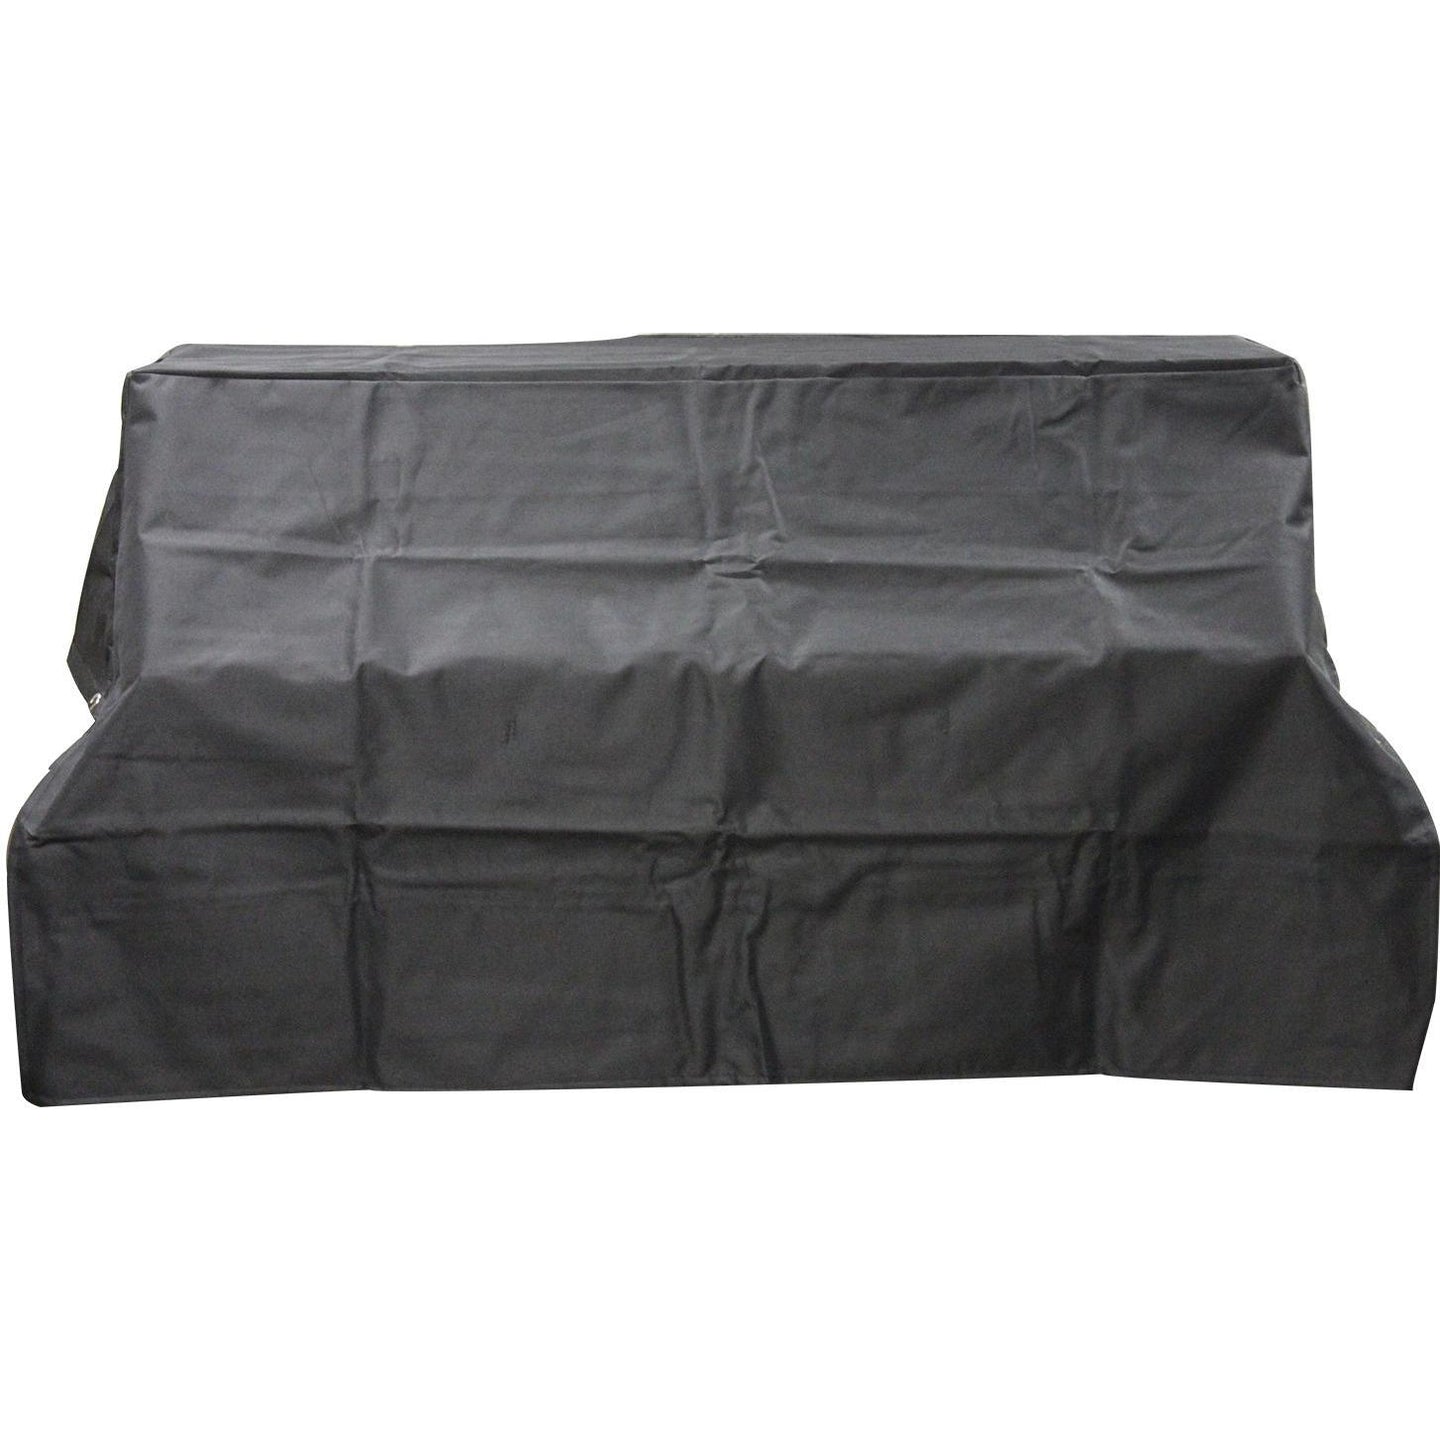 Summerset Deluxe Grill Cover For 38-Inch TRL / 40-Inch Sizzler Built-In Gas Grills